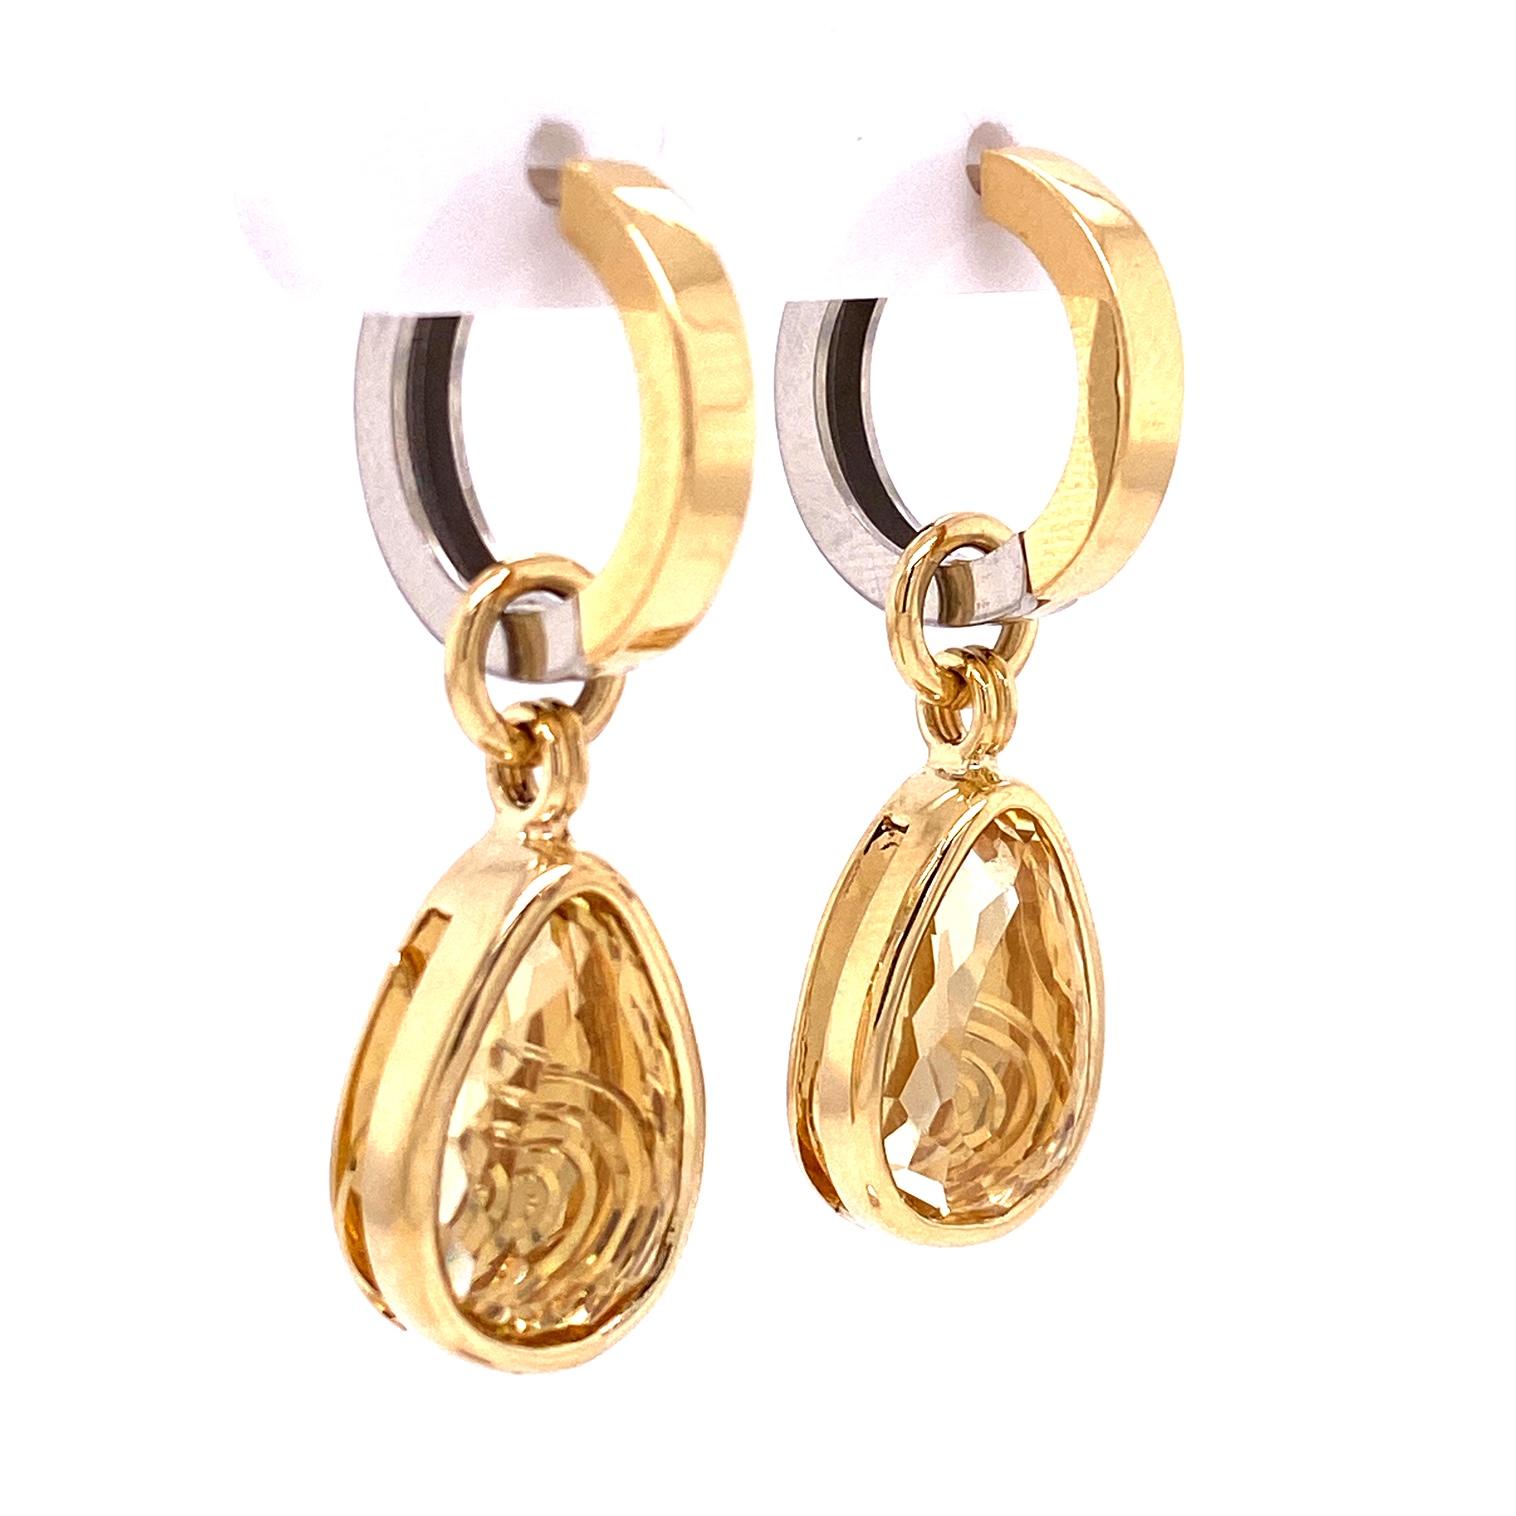 A pair of reversible 18k white and yellow gold huggie hoops and, a pair of 18k yellow gold 13.4mm x 9mm pear shaped antique cut yellow beryl jackets with yellow gold back plates hand engraved with klimt inspired spiral patterns . These jackets were